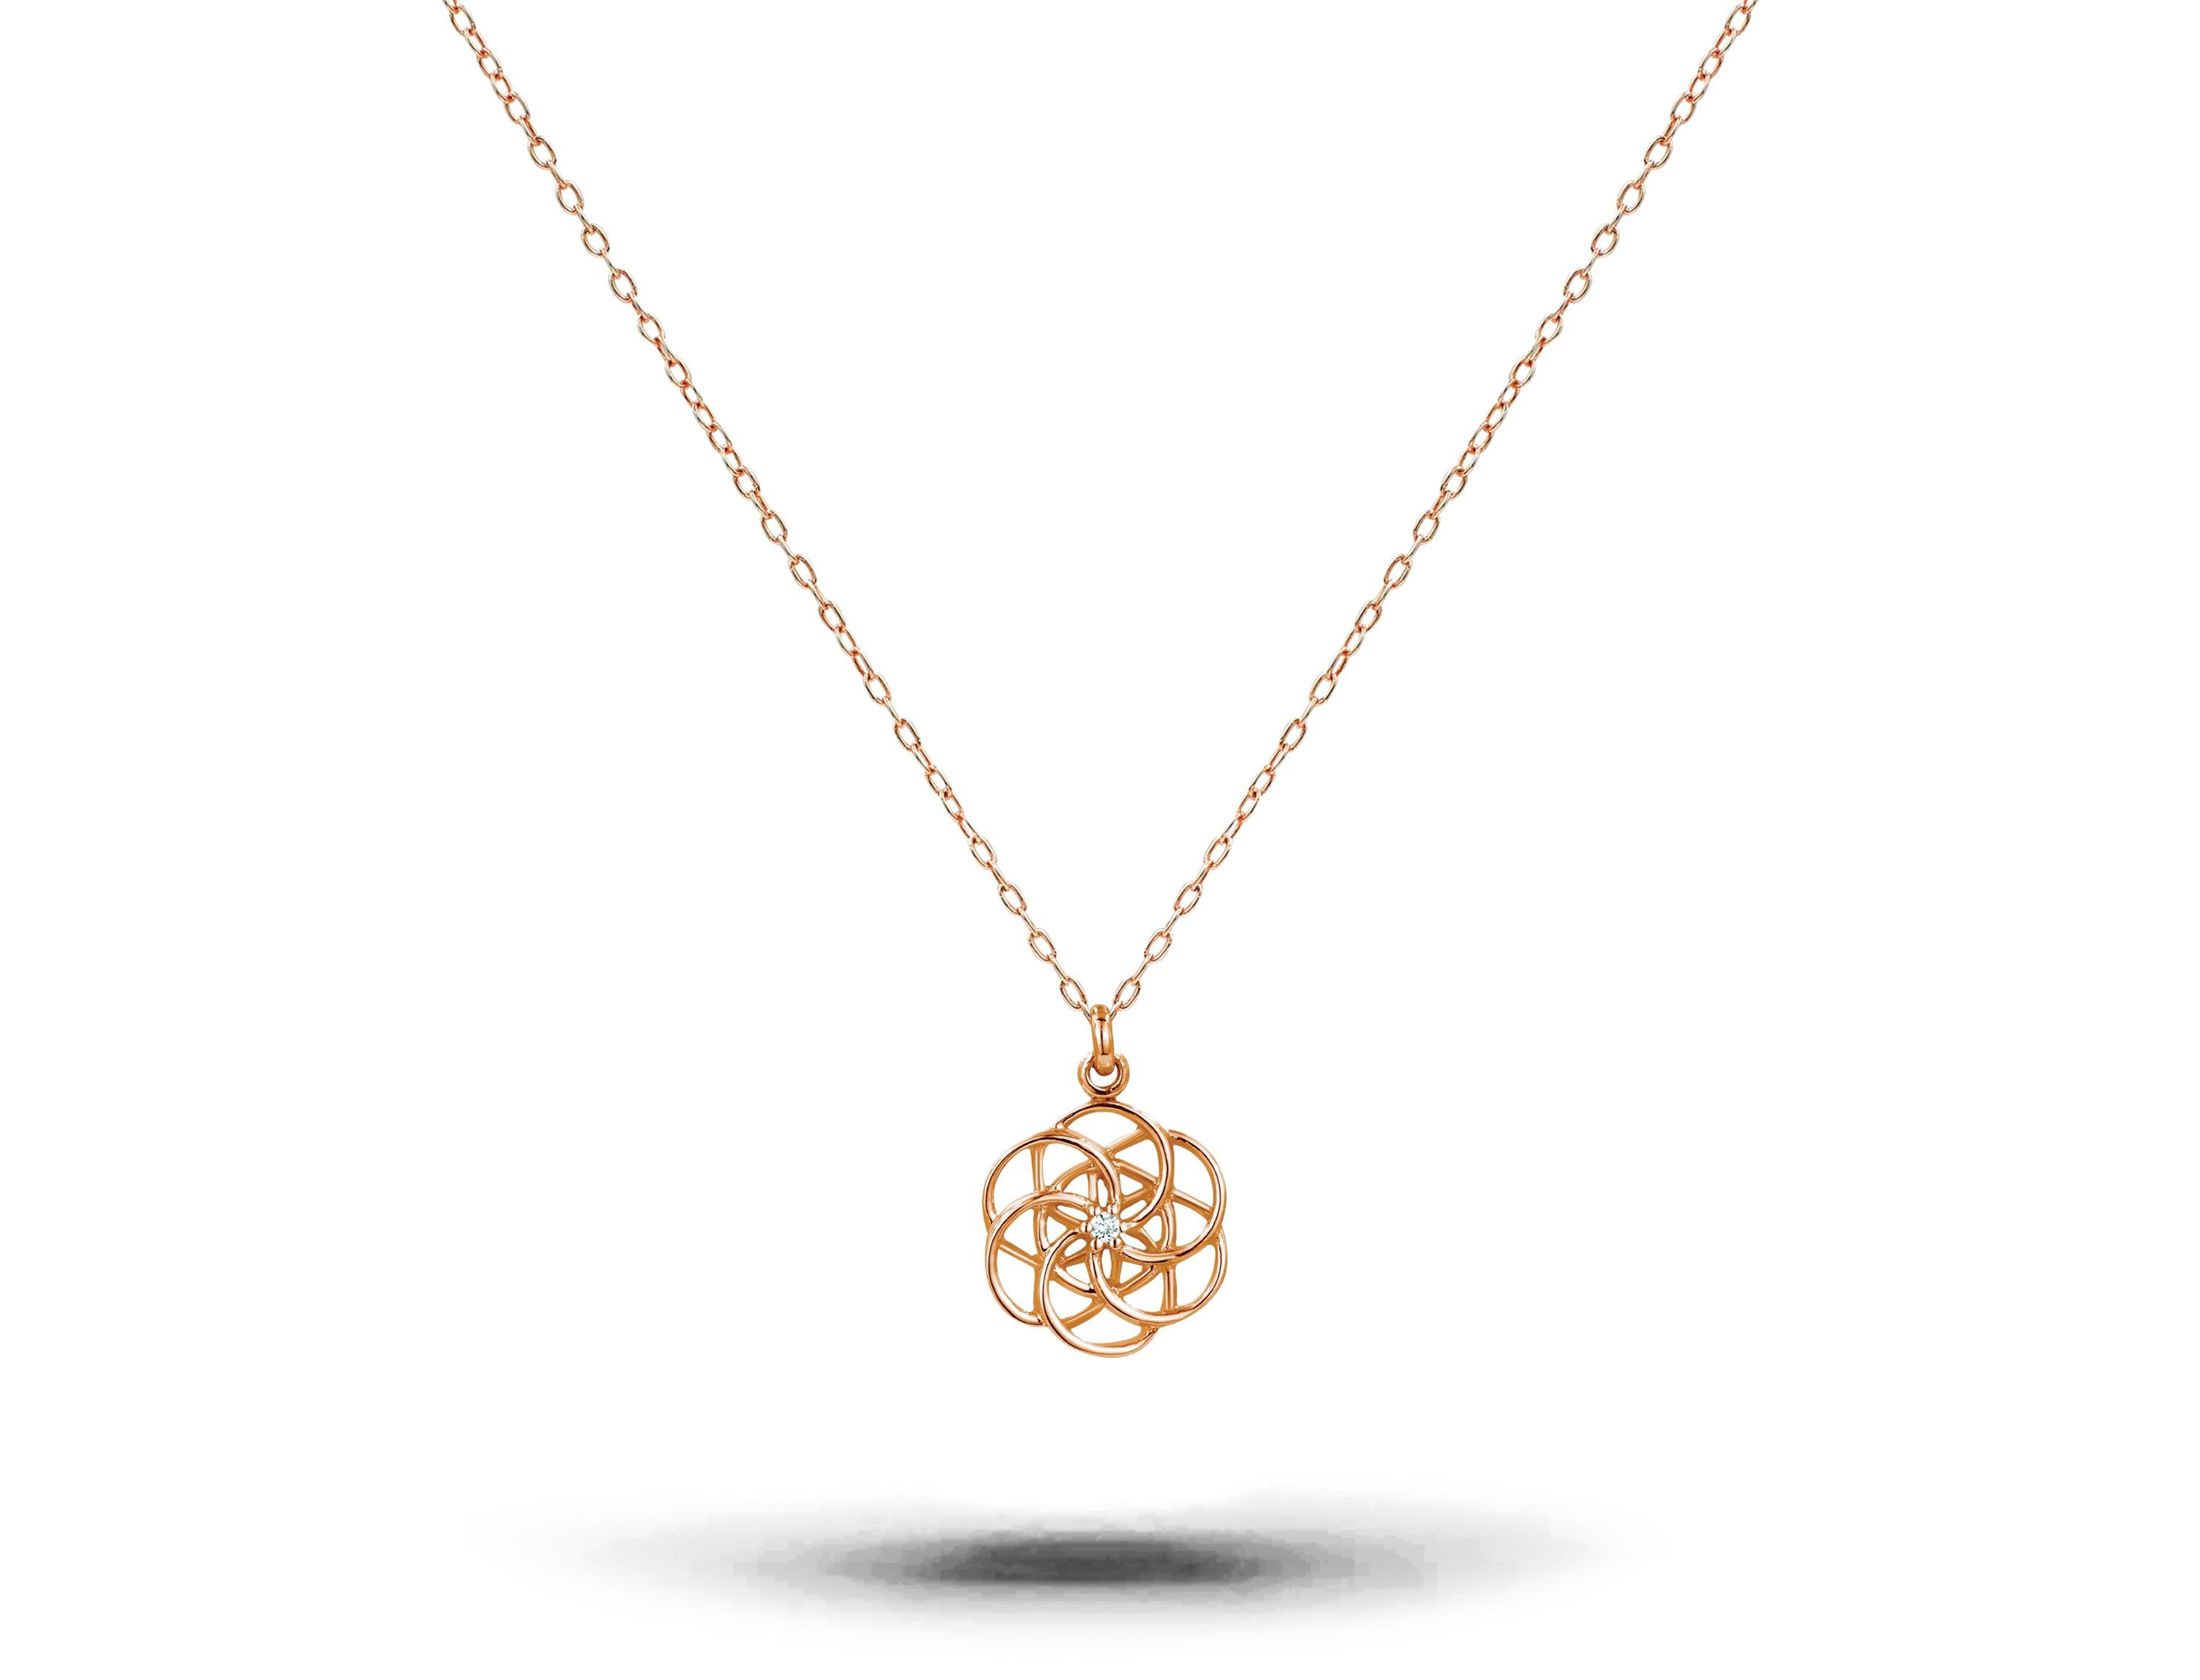 Sacred Geometry Spiritual Necklace made of 14k solid gold available in three colors of gold, White Gold / Rose Gold / Yellow Gold.

Sacred Seed of Tree Pendent made with 14k gold with accent center round cut diamond. The diamond is very high quality